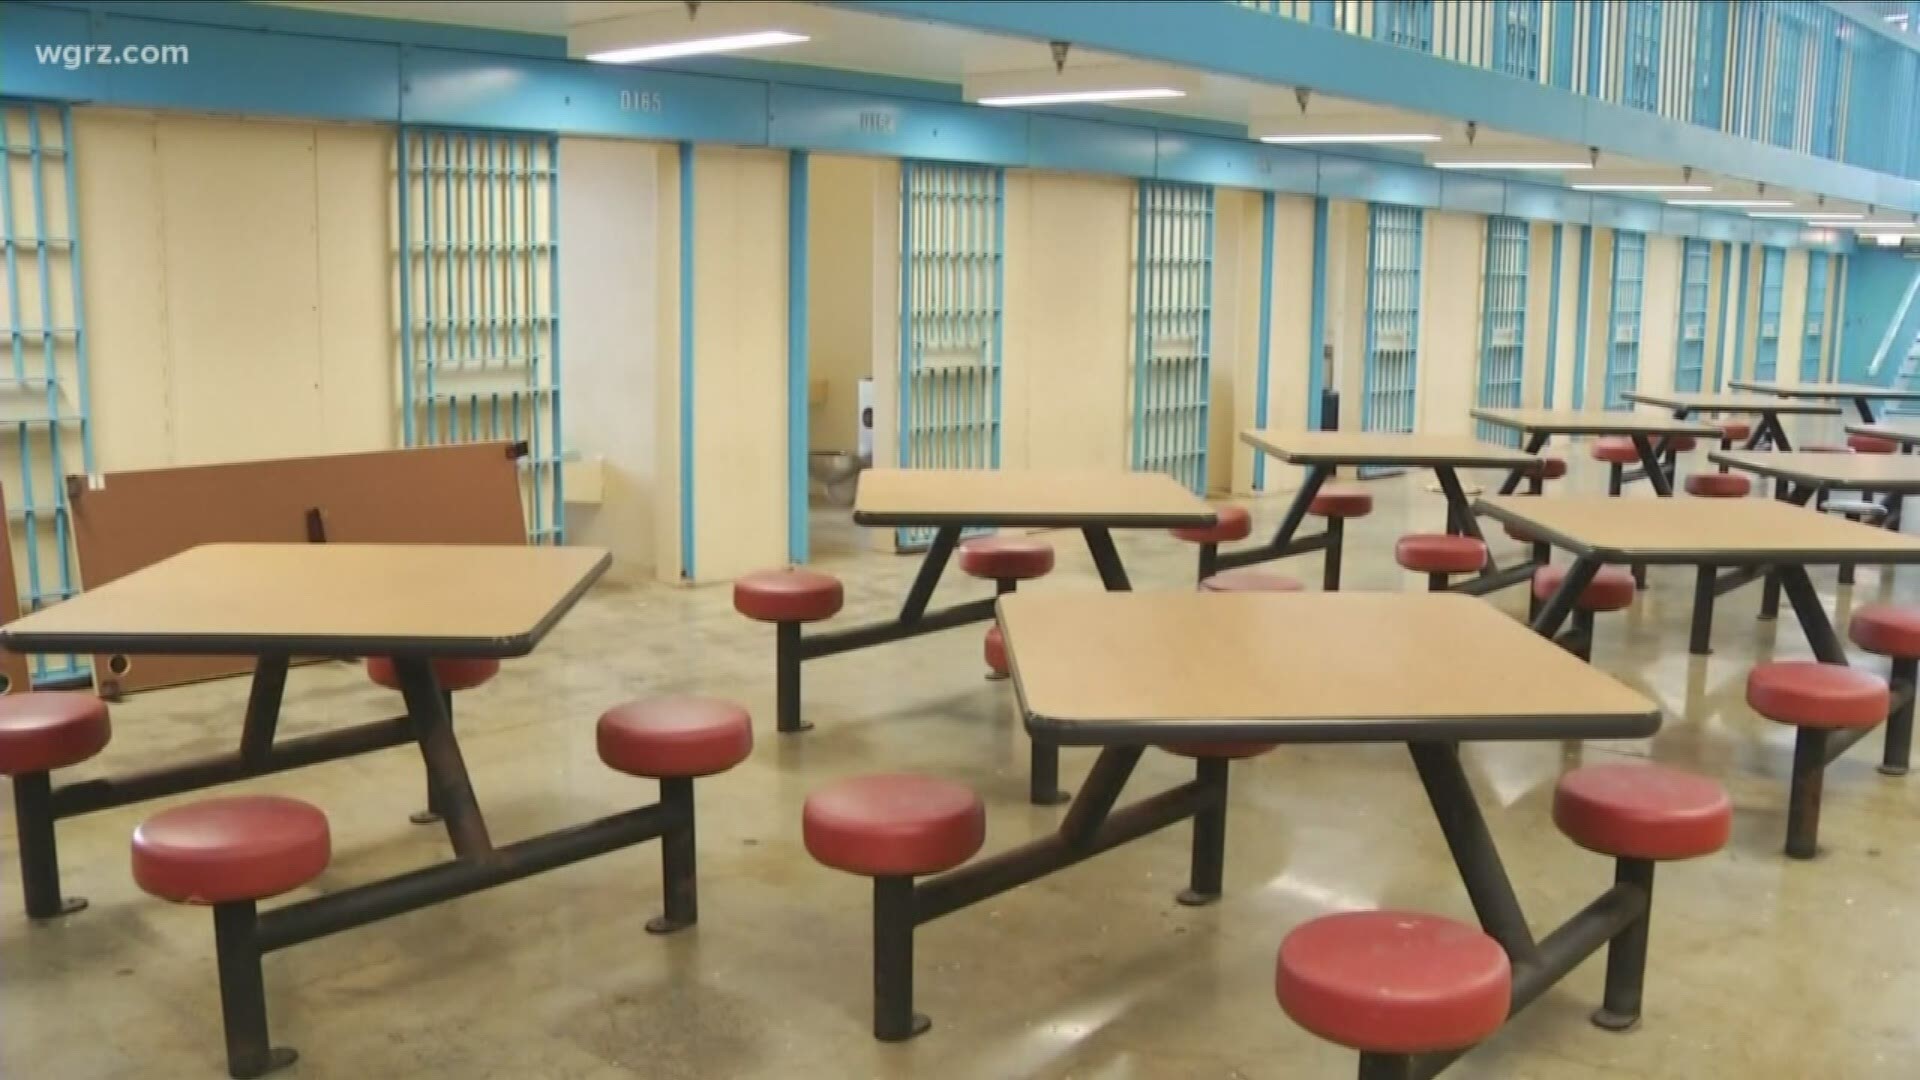 17 Erie County Inmates To Be Released